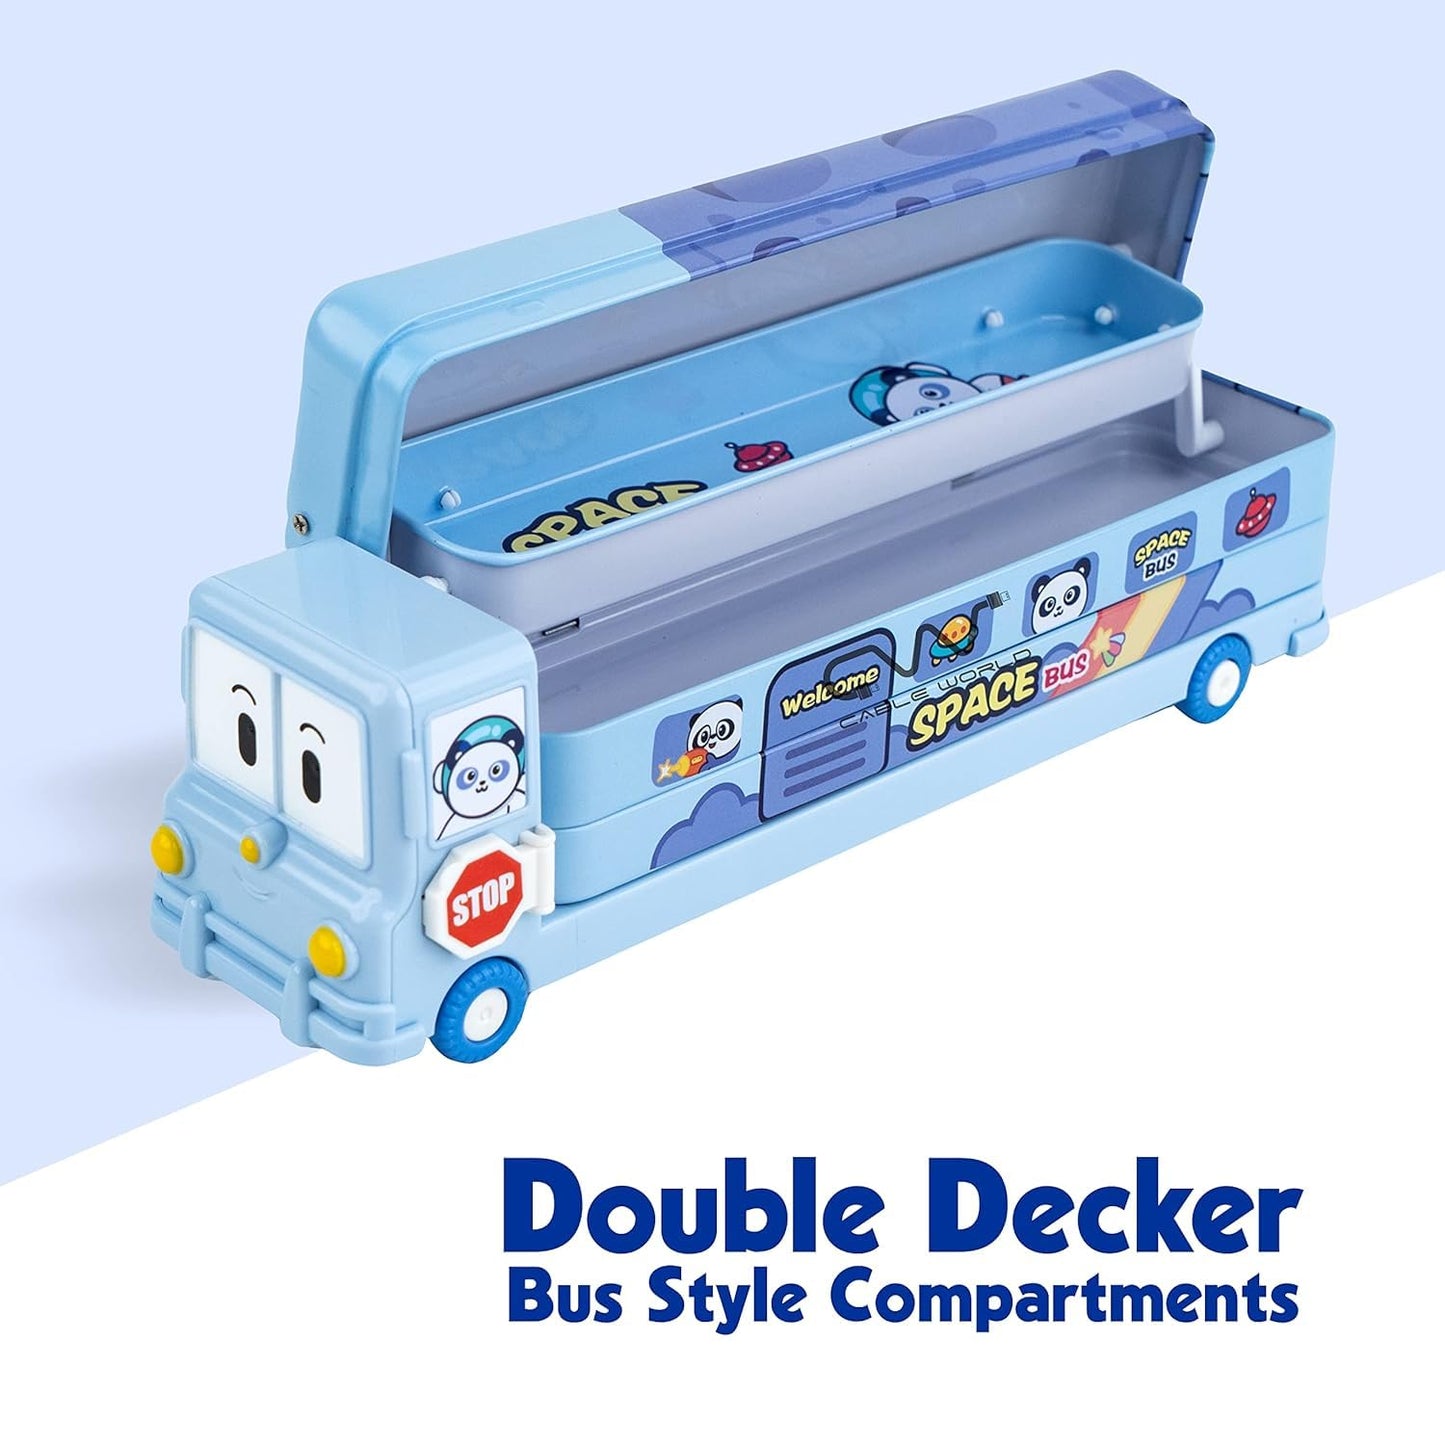 MECHBORN Space School Bus Shaped Pencil Box for Kids with Wheels and Sharpener Metal - (Space Design) Multicolor (Space Bus Pencil Box)